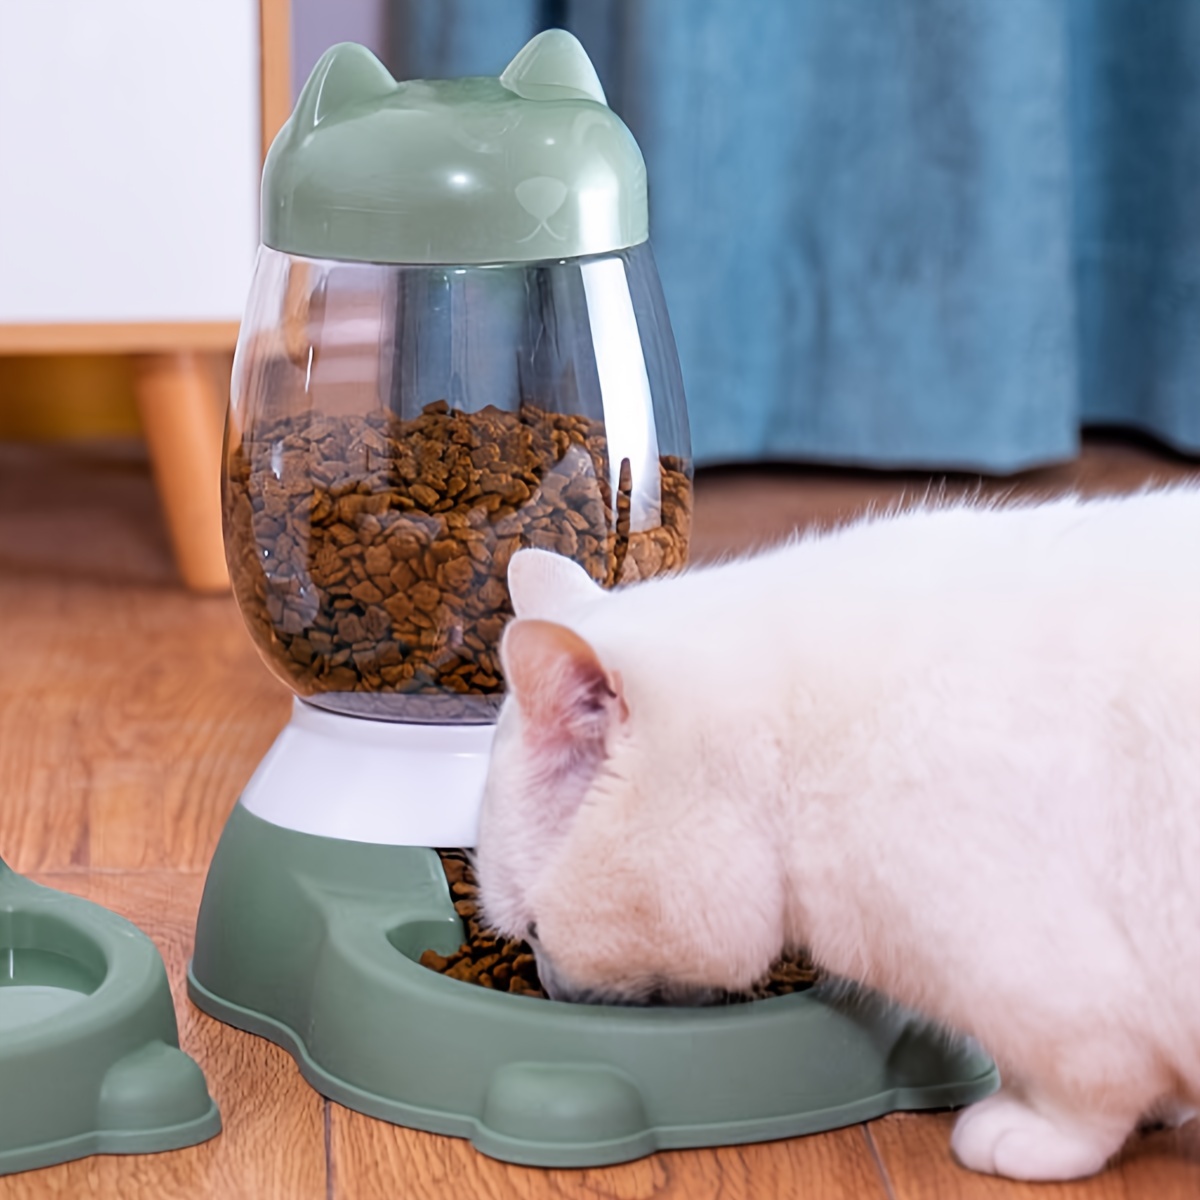 

1pc Large Capacity Pet Automatic Feeder, Gravity Cat Food Dispenser, Convenient And Hygienic Solution For Cat Feeding Supply